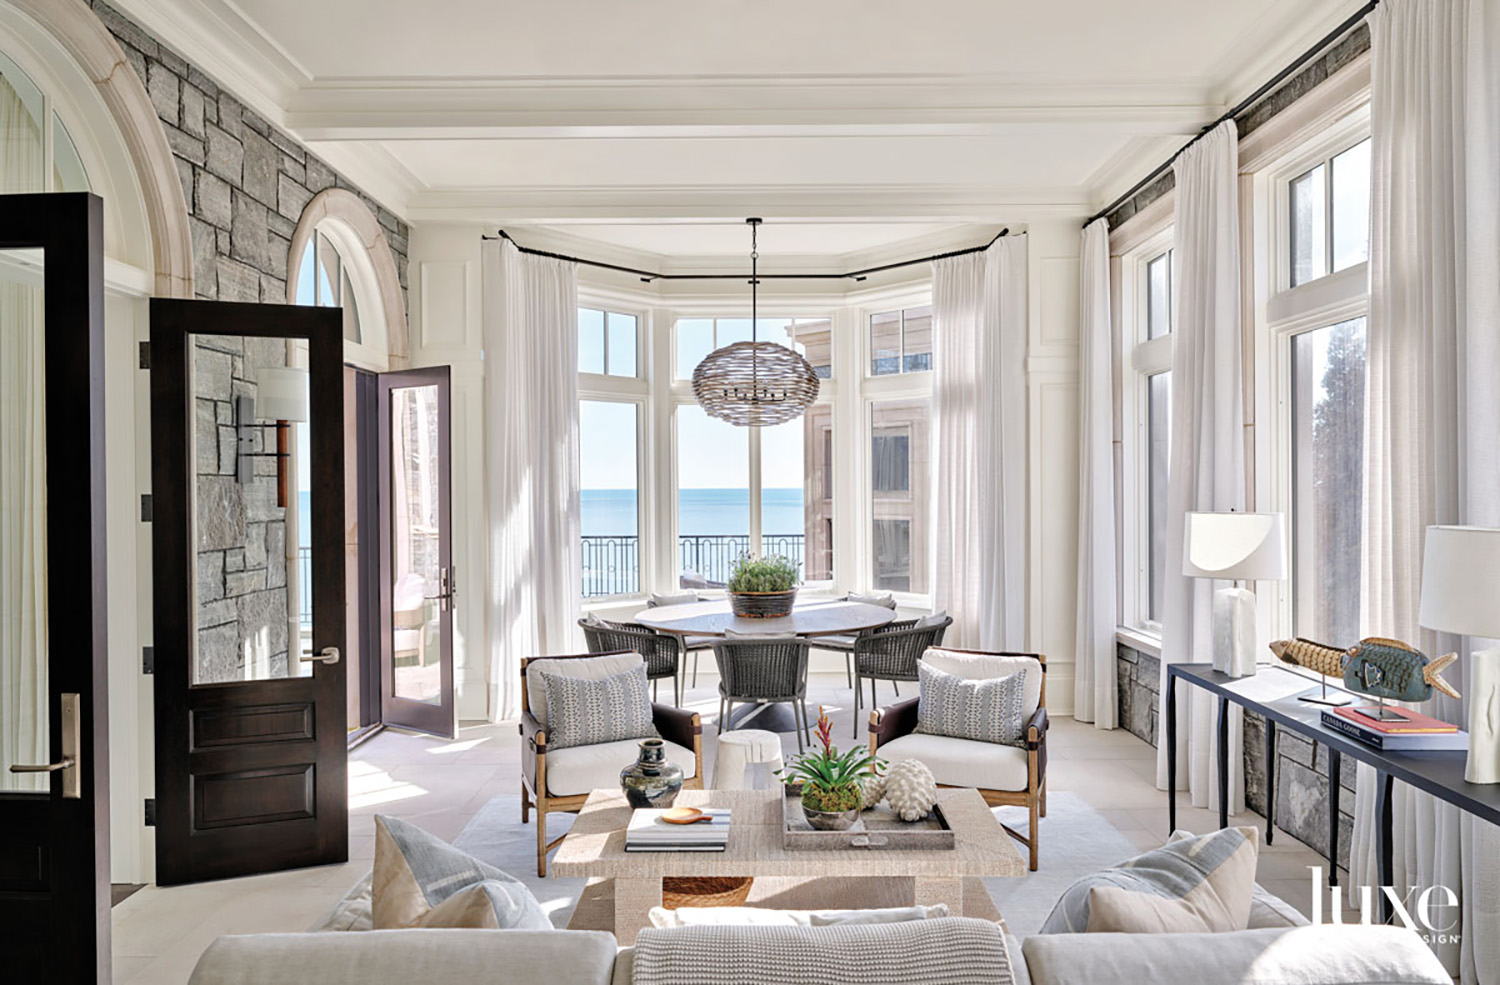 A round table on one side of a sun room that looks out on the lake. A round chandelier hangs above.